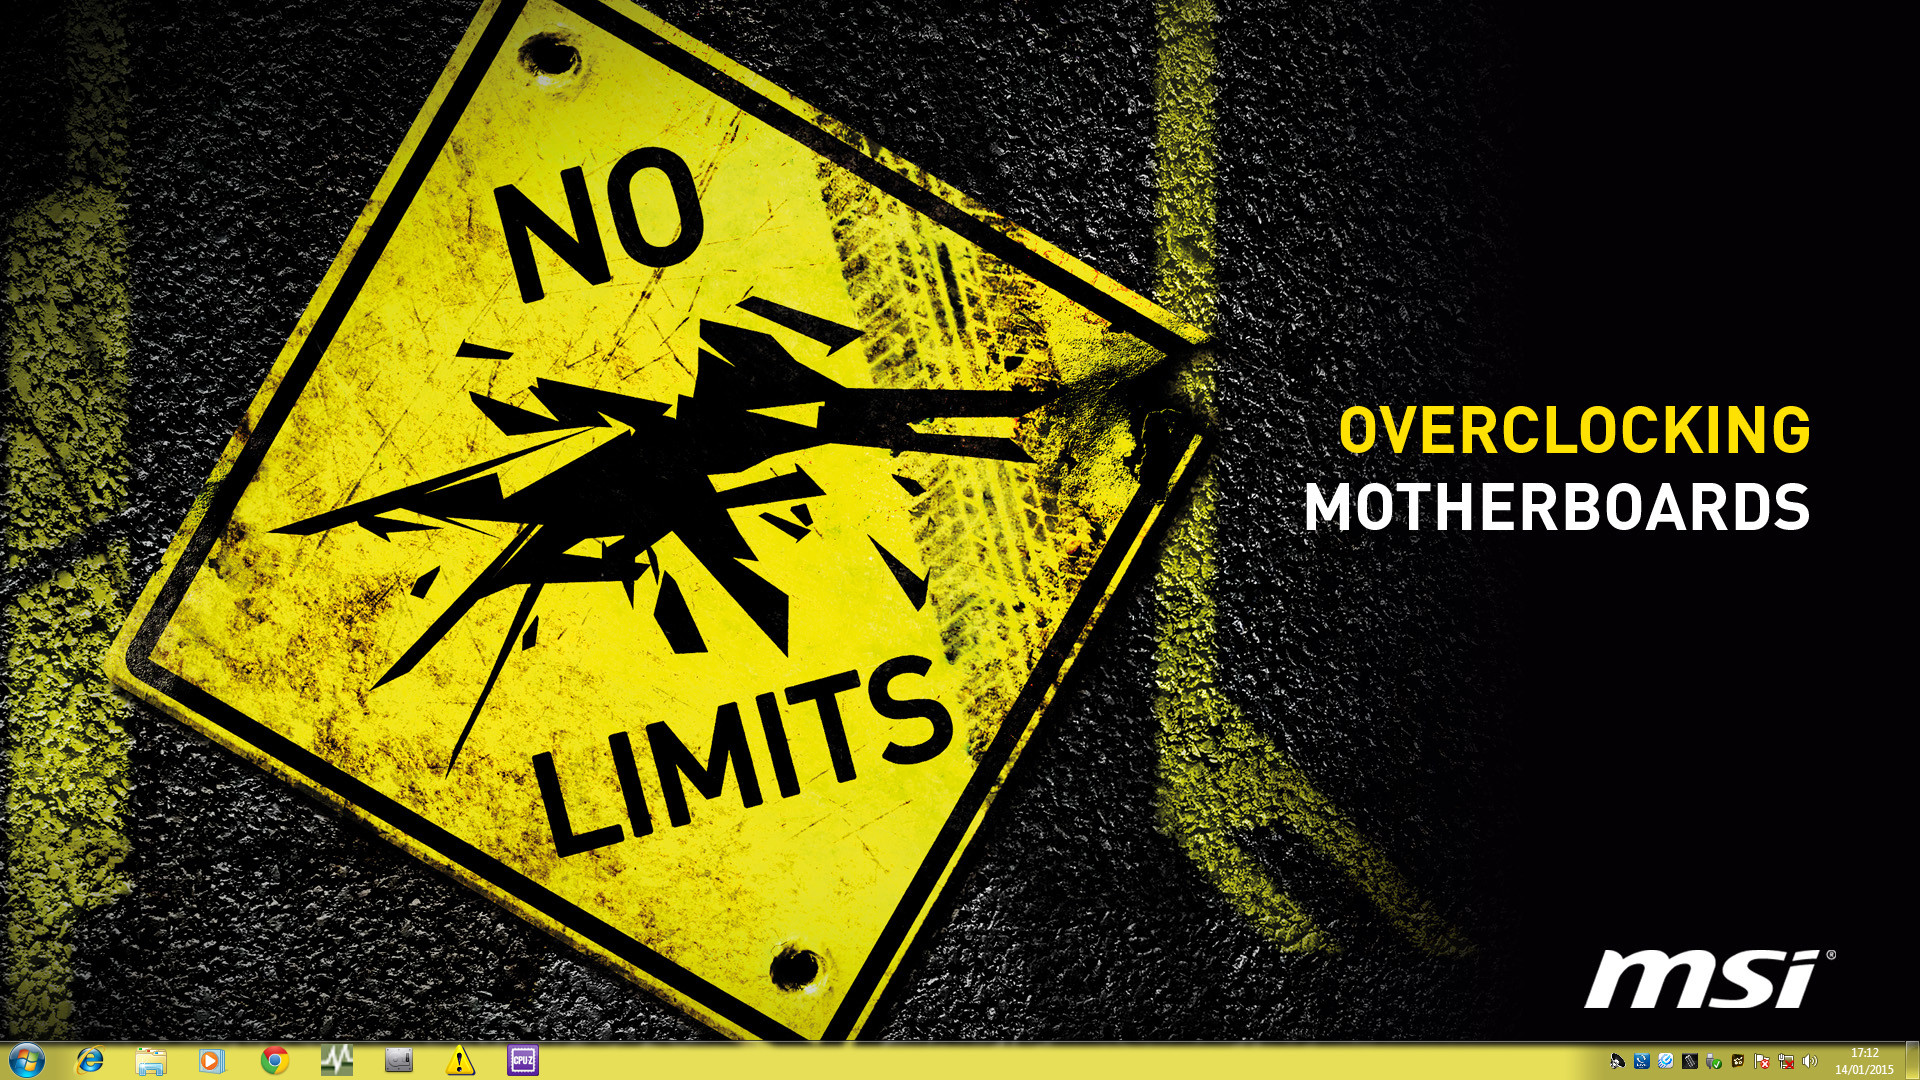 1920x1080 Search Results for “msi no limits wallpaper” – Adorable Wallpapers